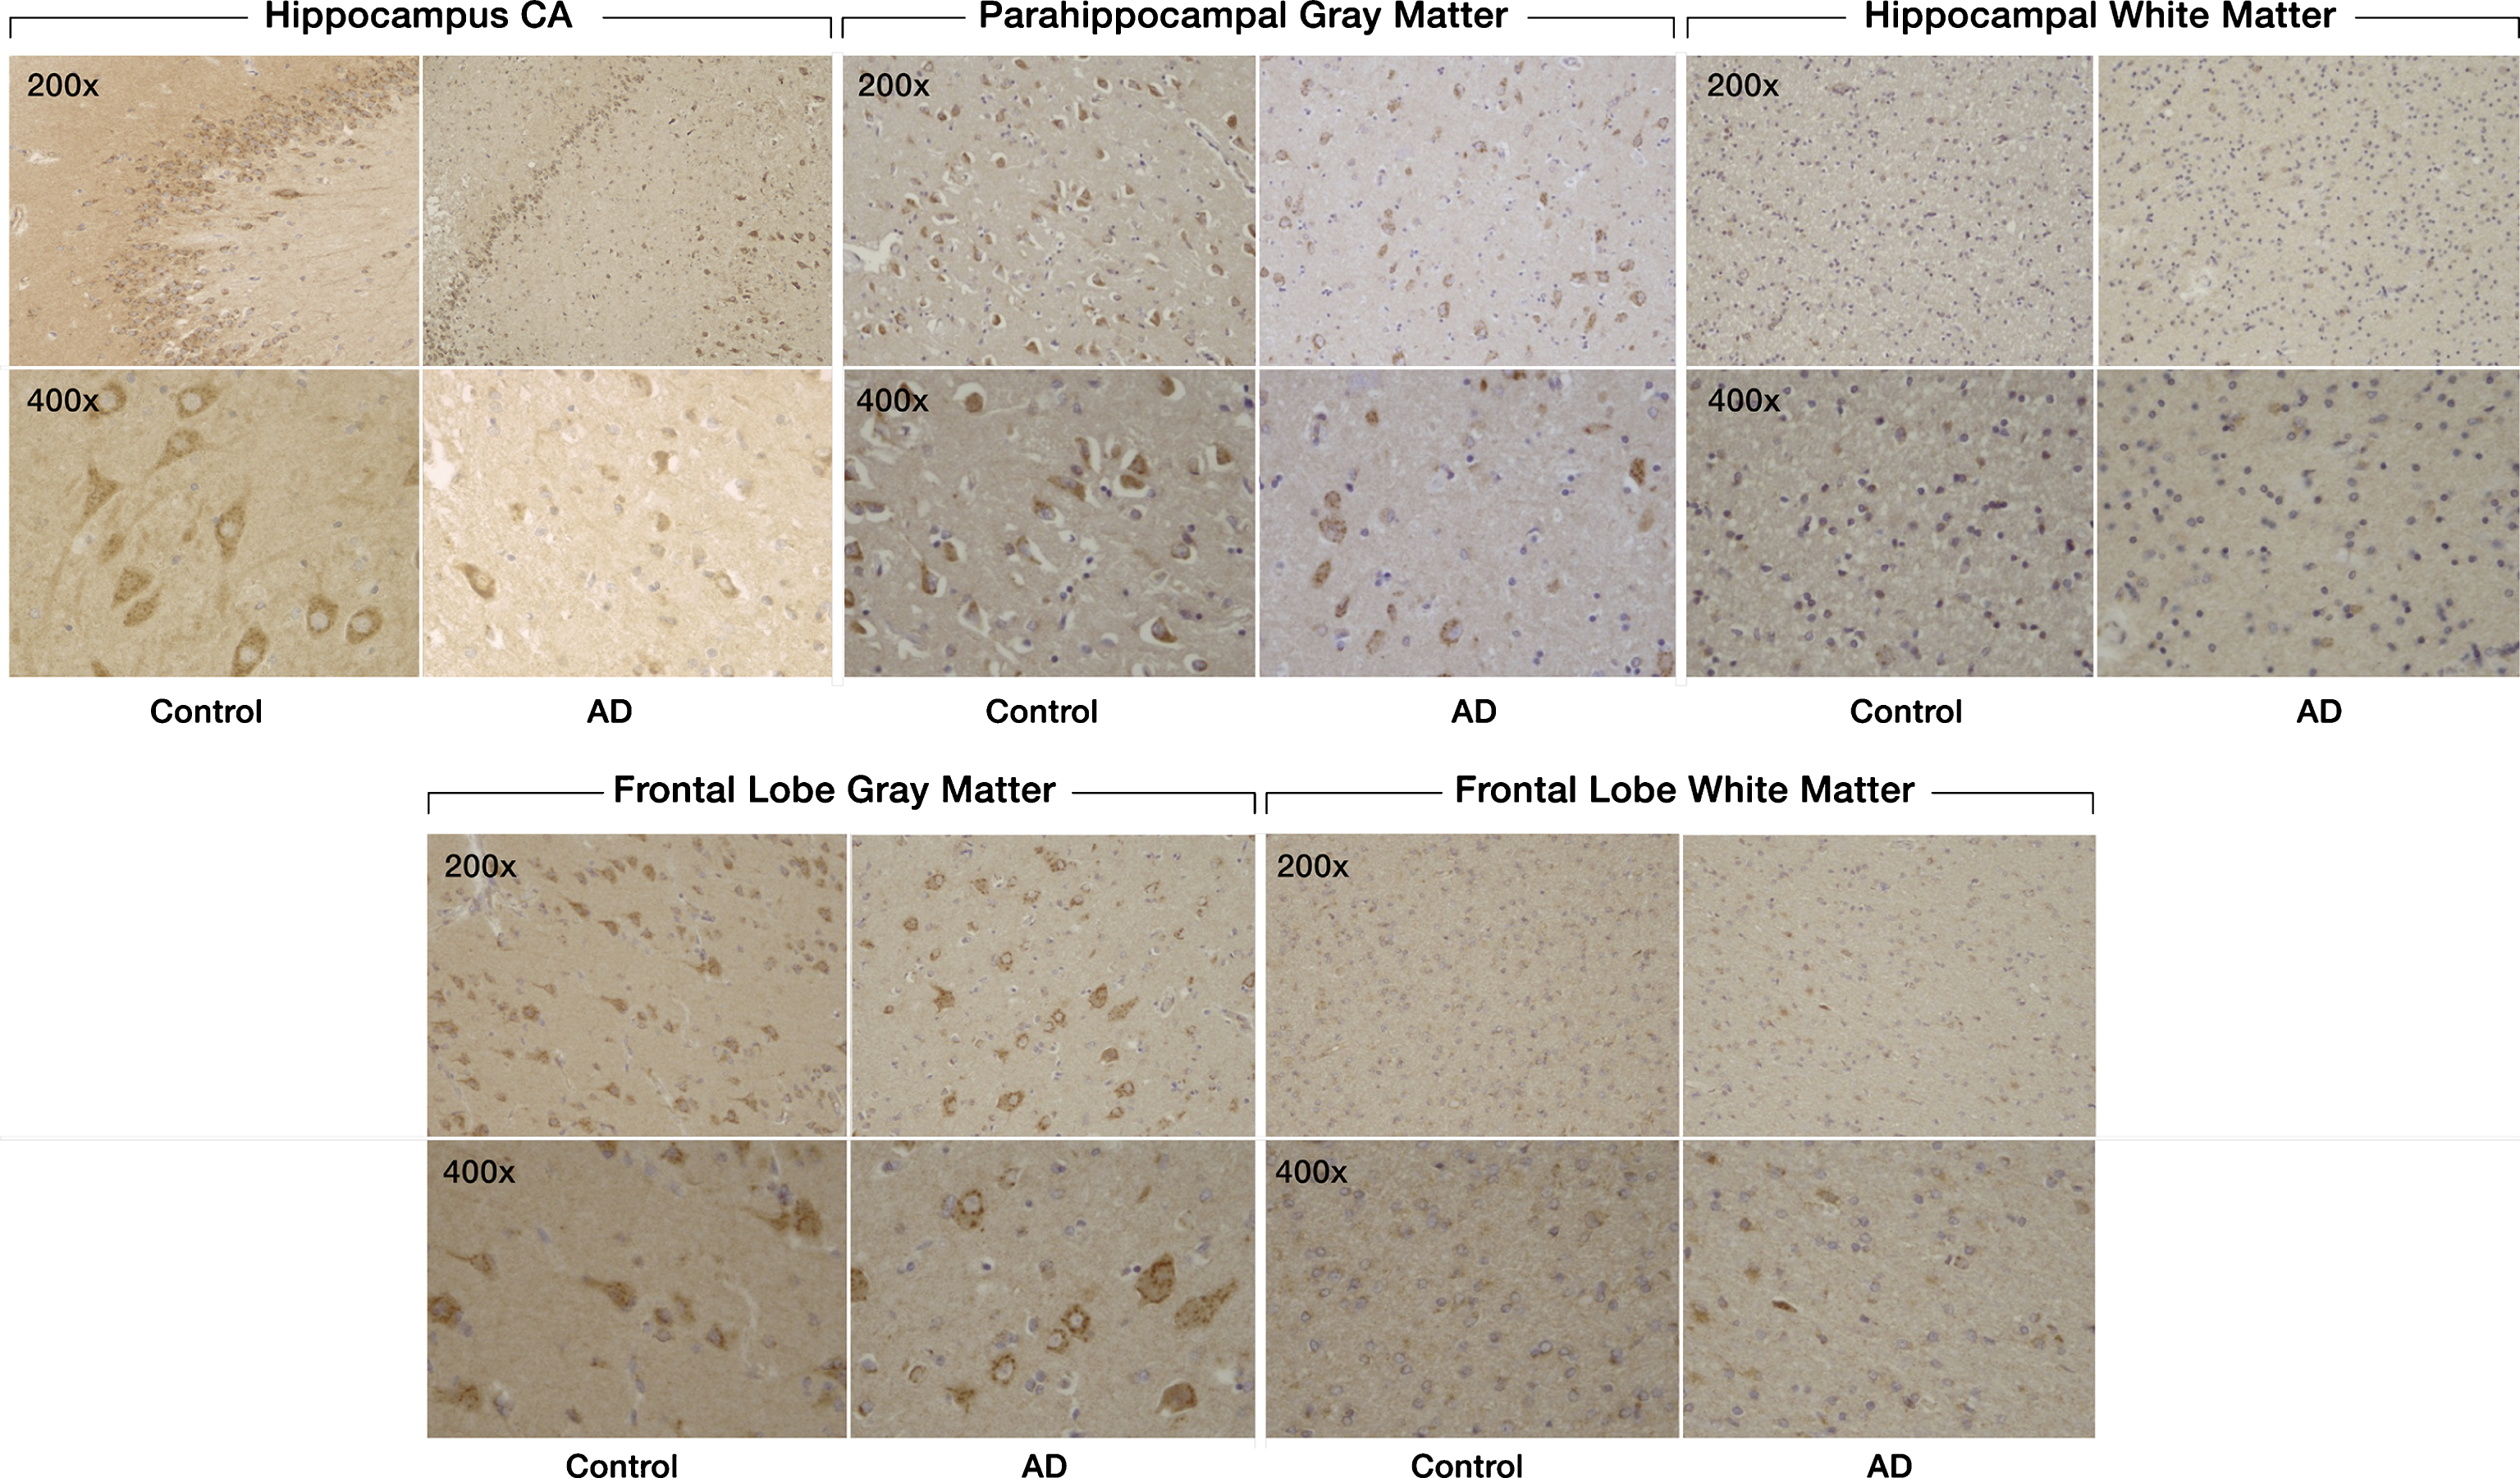 Expression of SULF2 in AD and cognitively normal control brain tissue. Immunohistochemical staining of SULF2 in the hippocampus and frontal lobe. There is less density of staining and a smaller proportion of cells are stained in the hippocampus CA and parahippocampal gray matter, as well as in the frontal lobe gray matter, in AD cases compared to cognitively normal controls. The quantification of SULF2 staining in the CA region encompassed the entire CA region, including CA1.